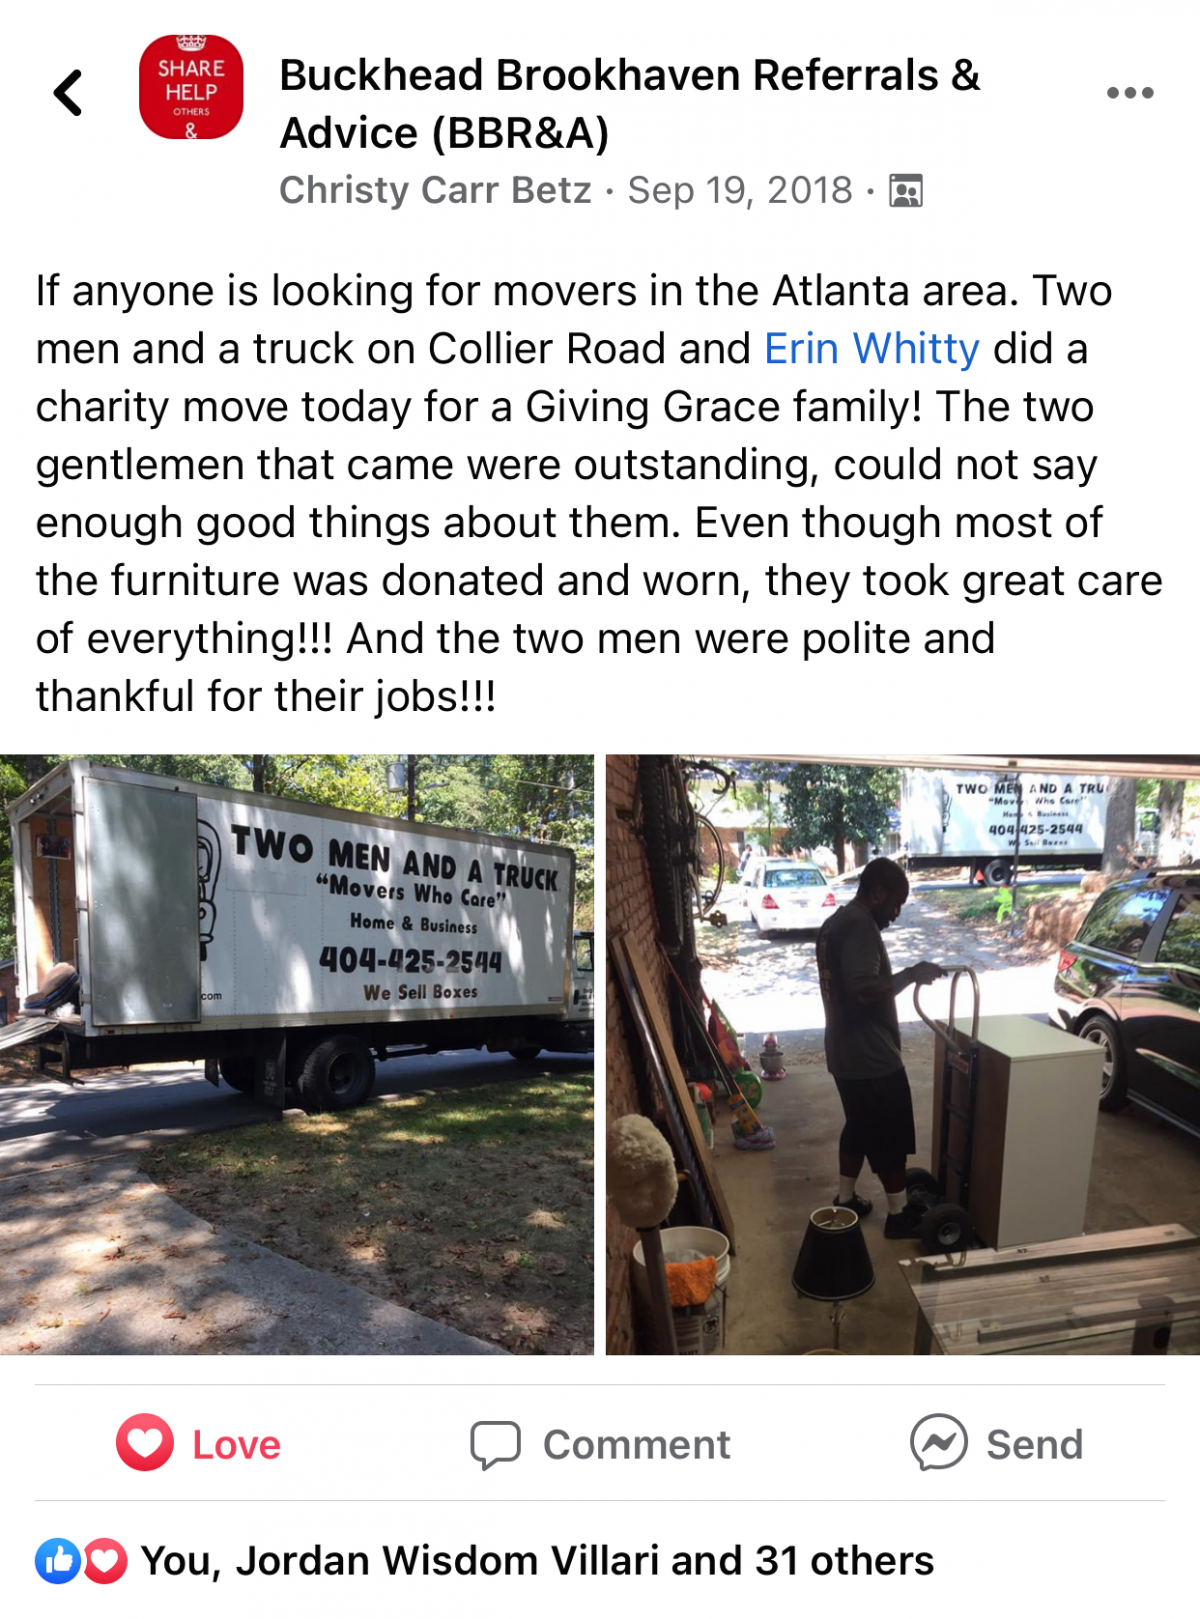 image of charity move